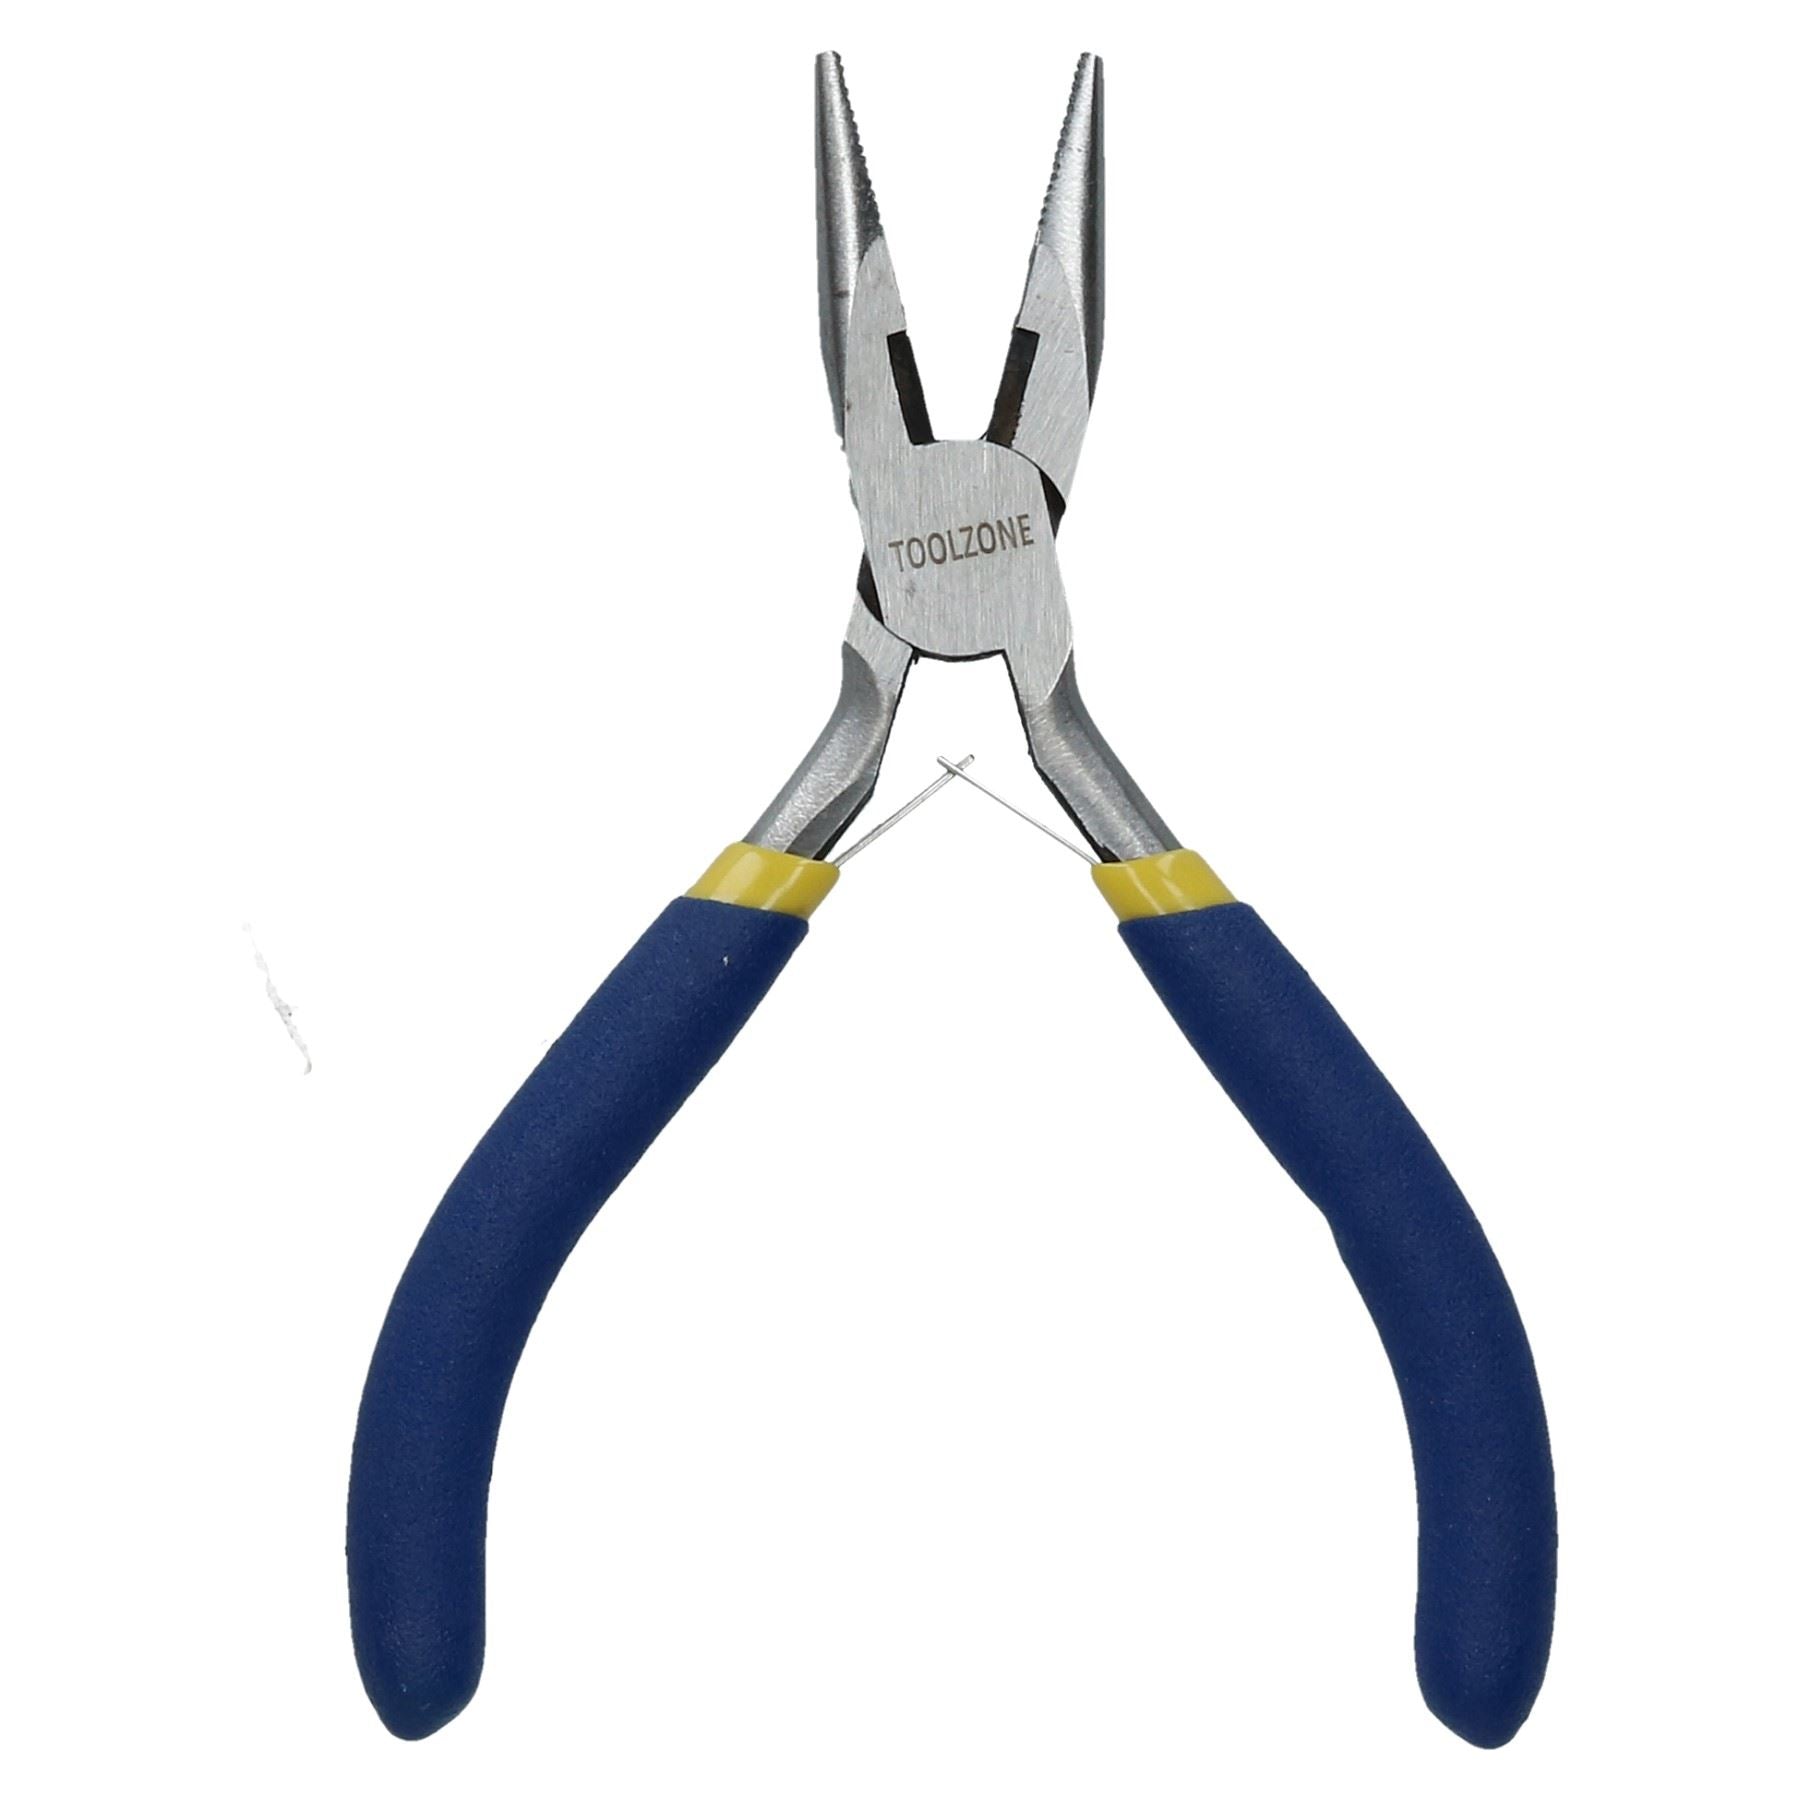 Straight Mini Long Nose Pliers Modelling Craft Hobby Fishing Plier 125mm / 5"